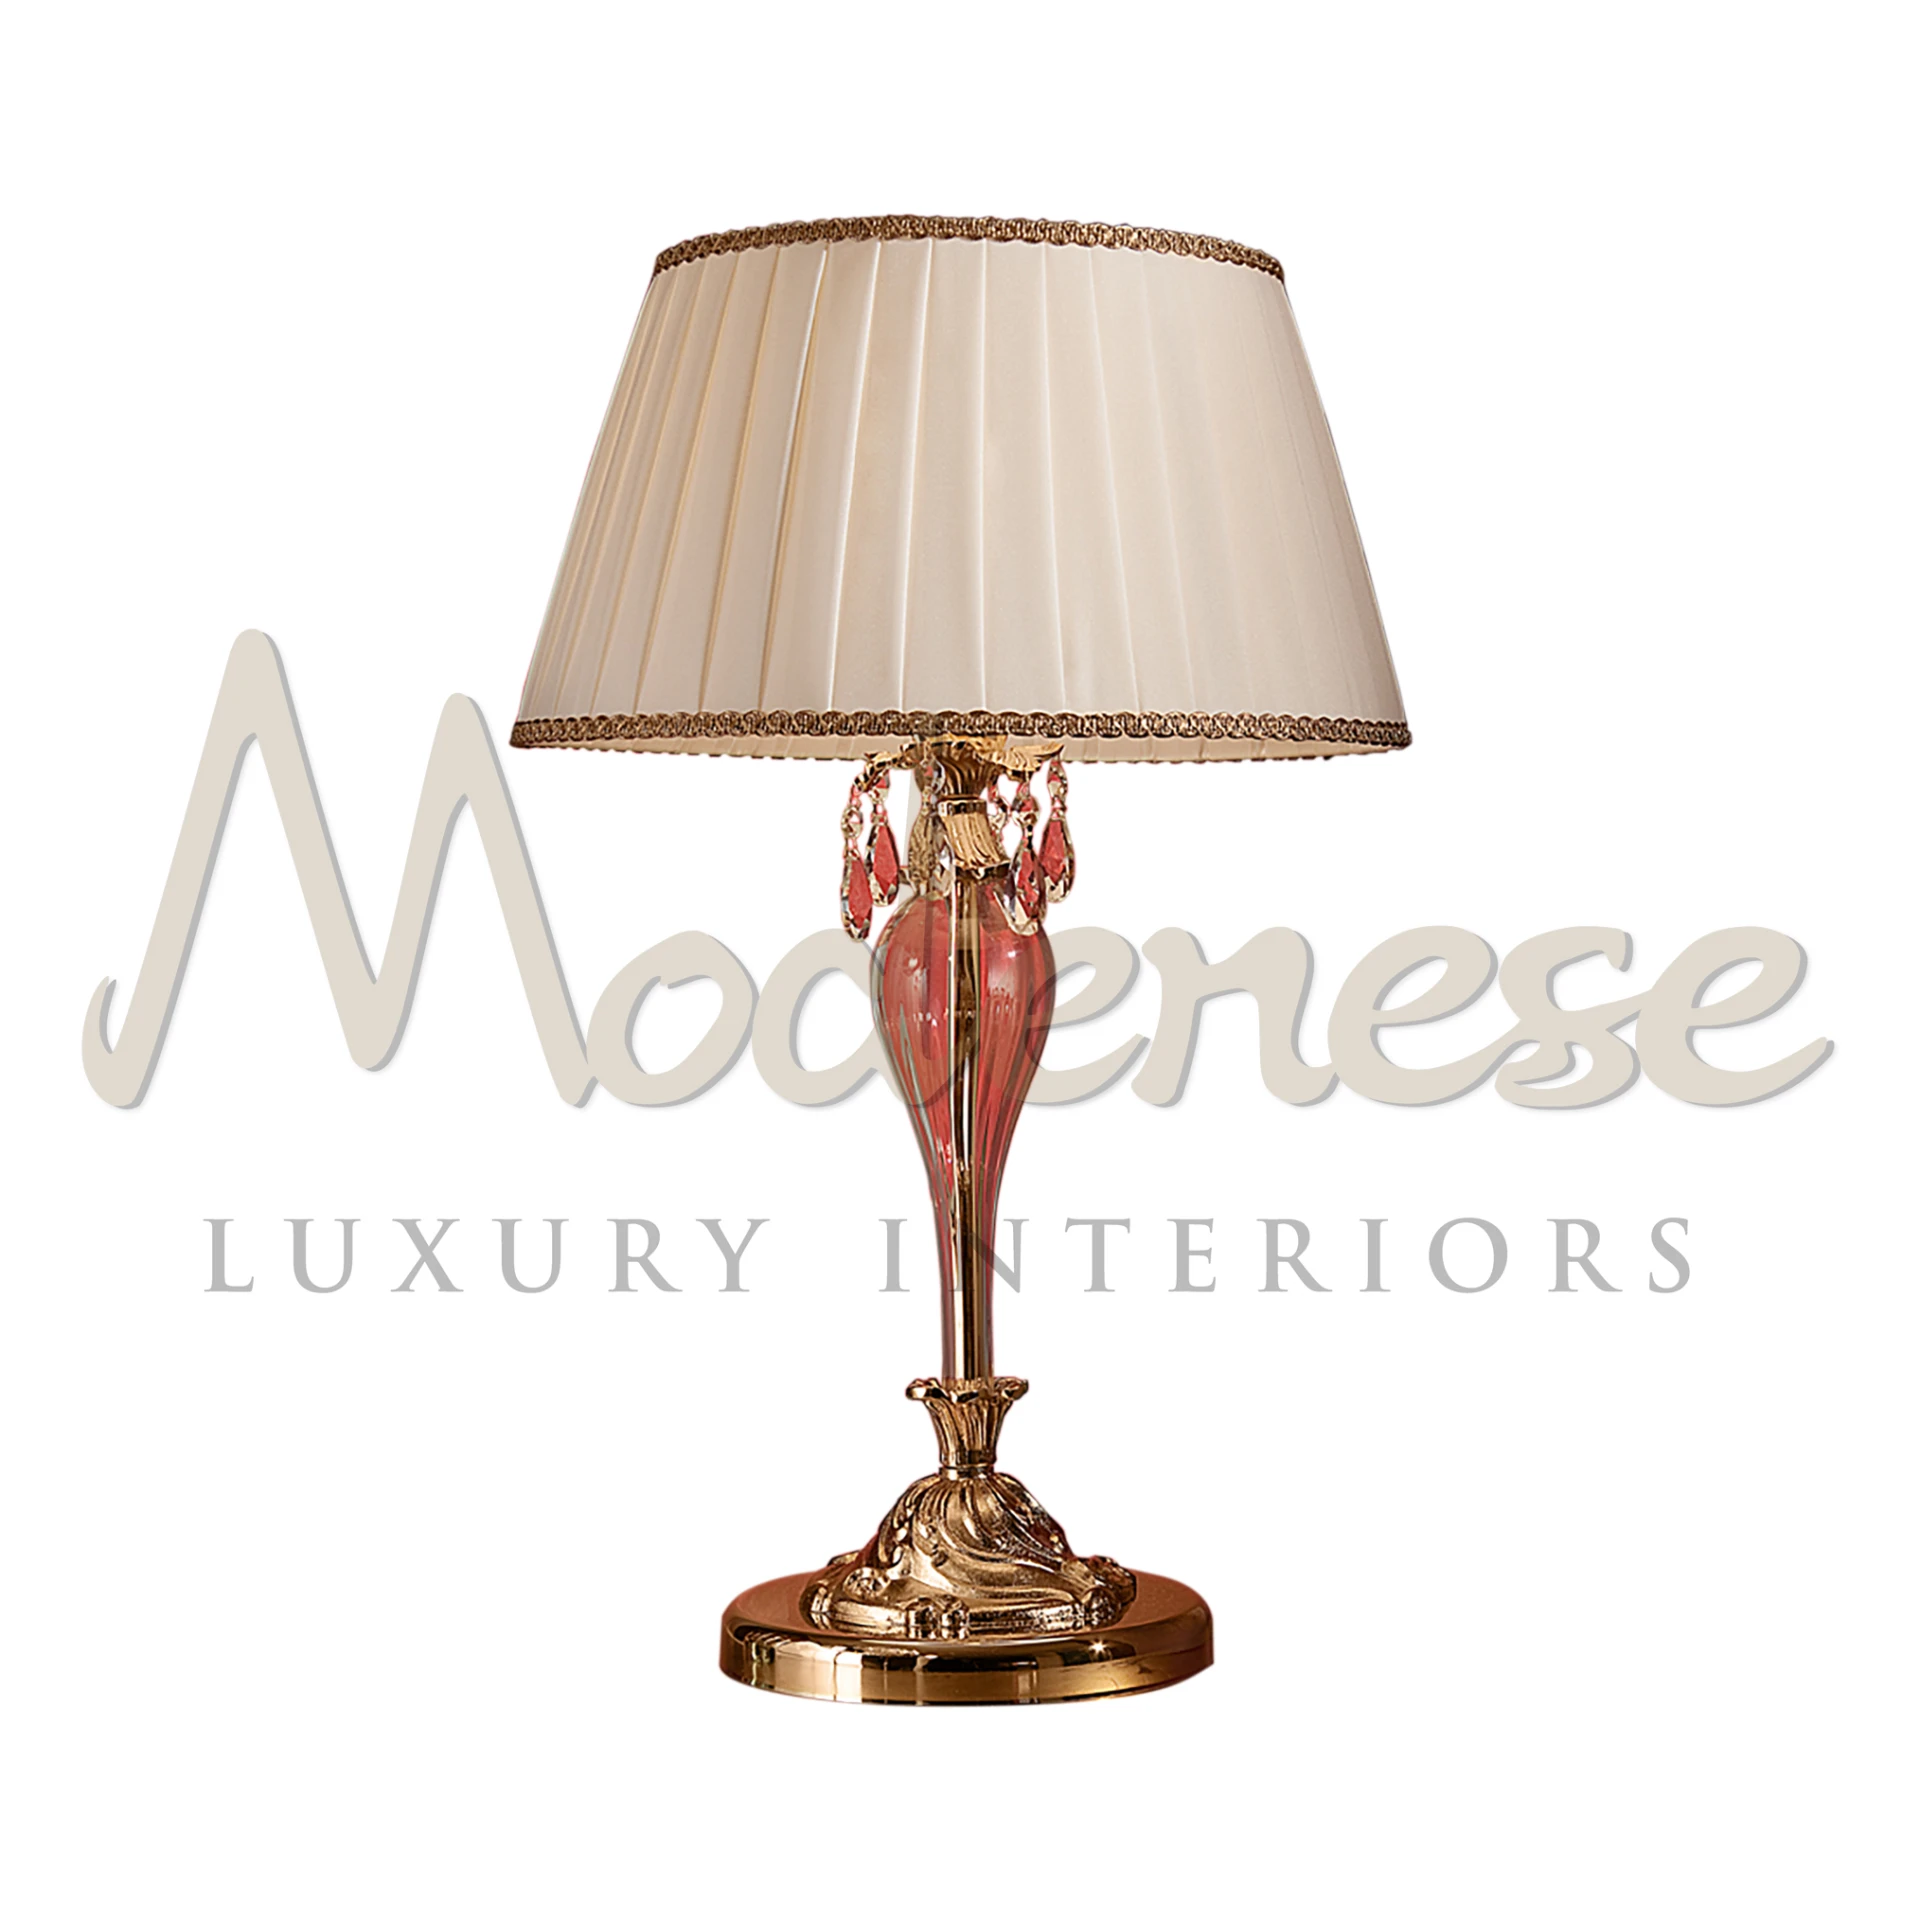 Luxurious Classical Table Lamp with a traditional red glass column and pleated shade